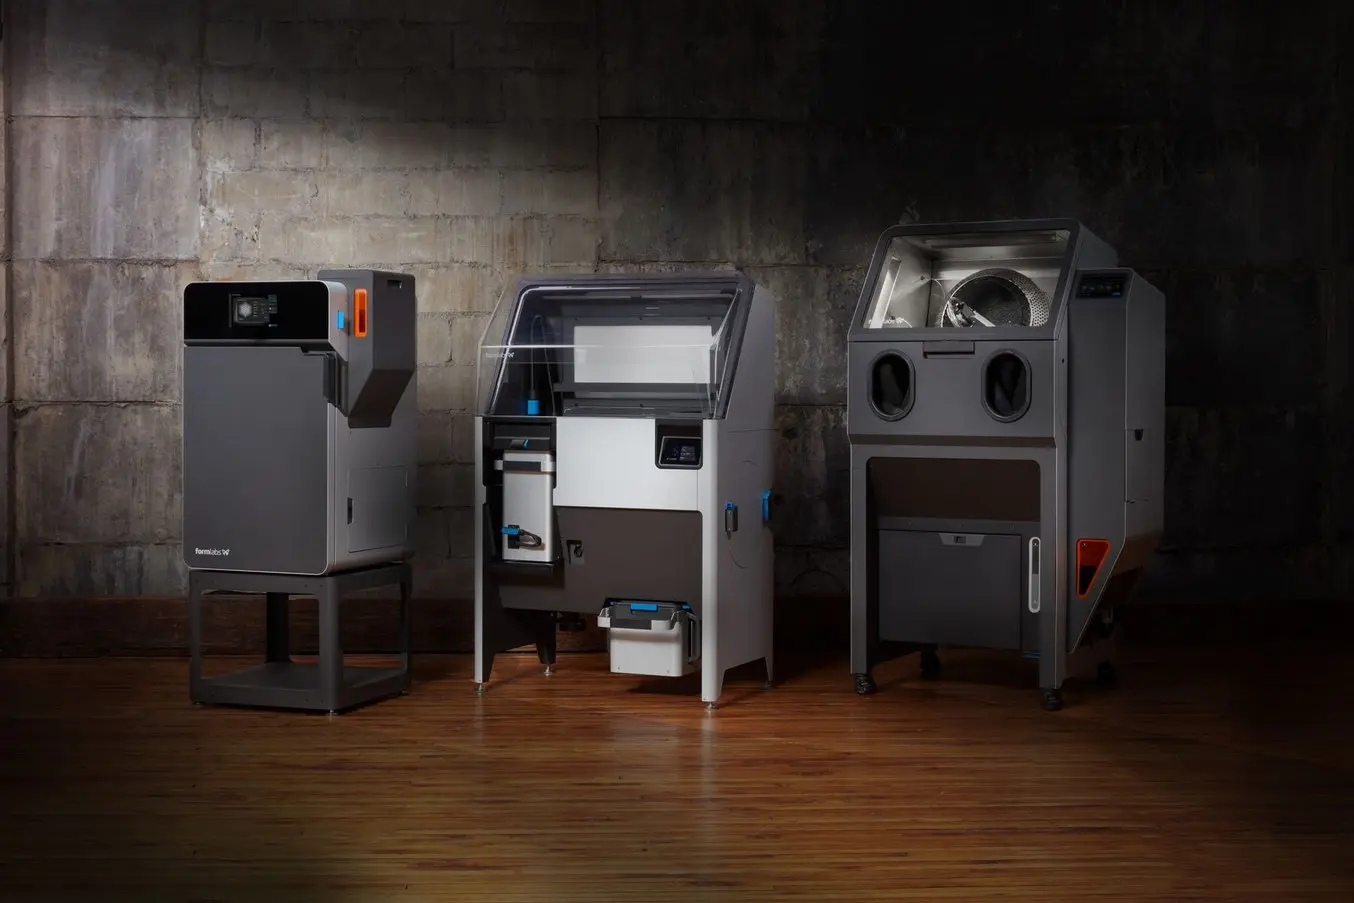 the Fuse Series SLS ecosystem, including the Fuse 1+ 30W SLS 3D printer, the Fuse Sift post-processing and powder recover system, and the Fuse Blast, Formlabs automated powder removal and part cleaning machine